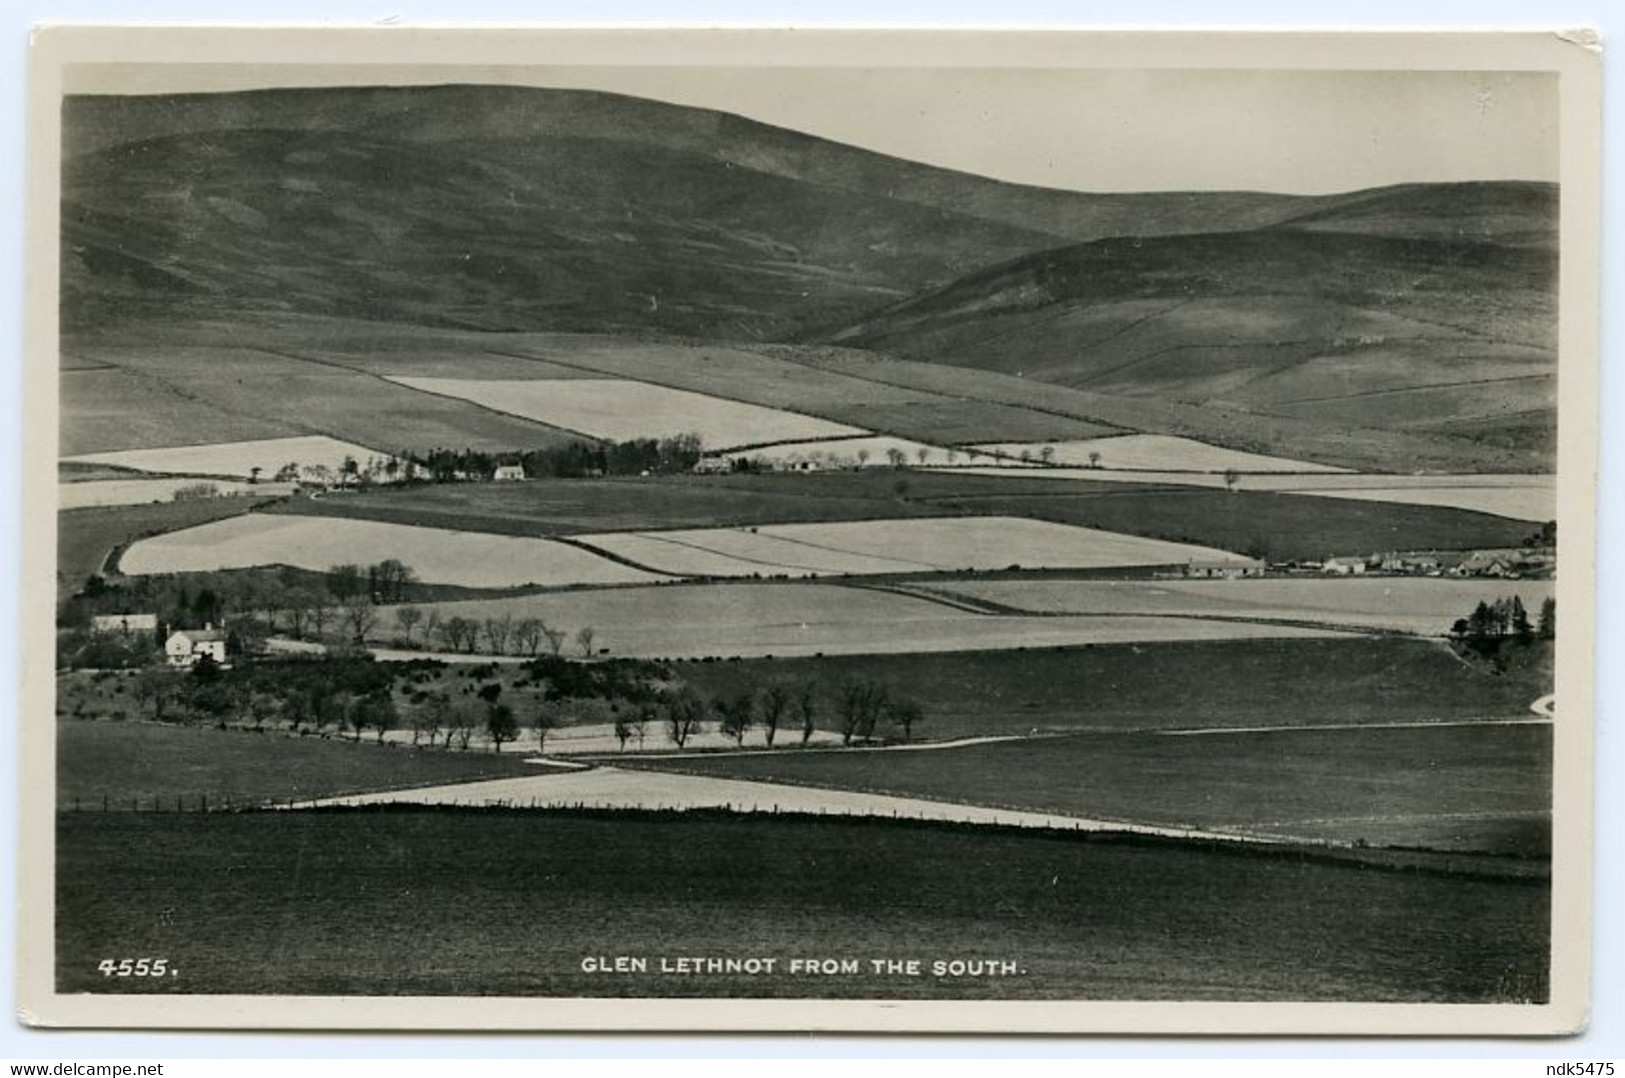 GLEN LETHNOT FROM THE SOUTH - Angus